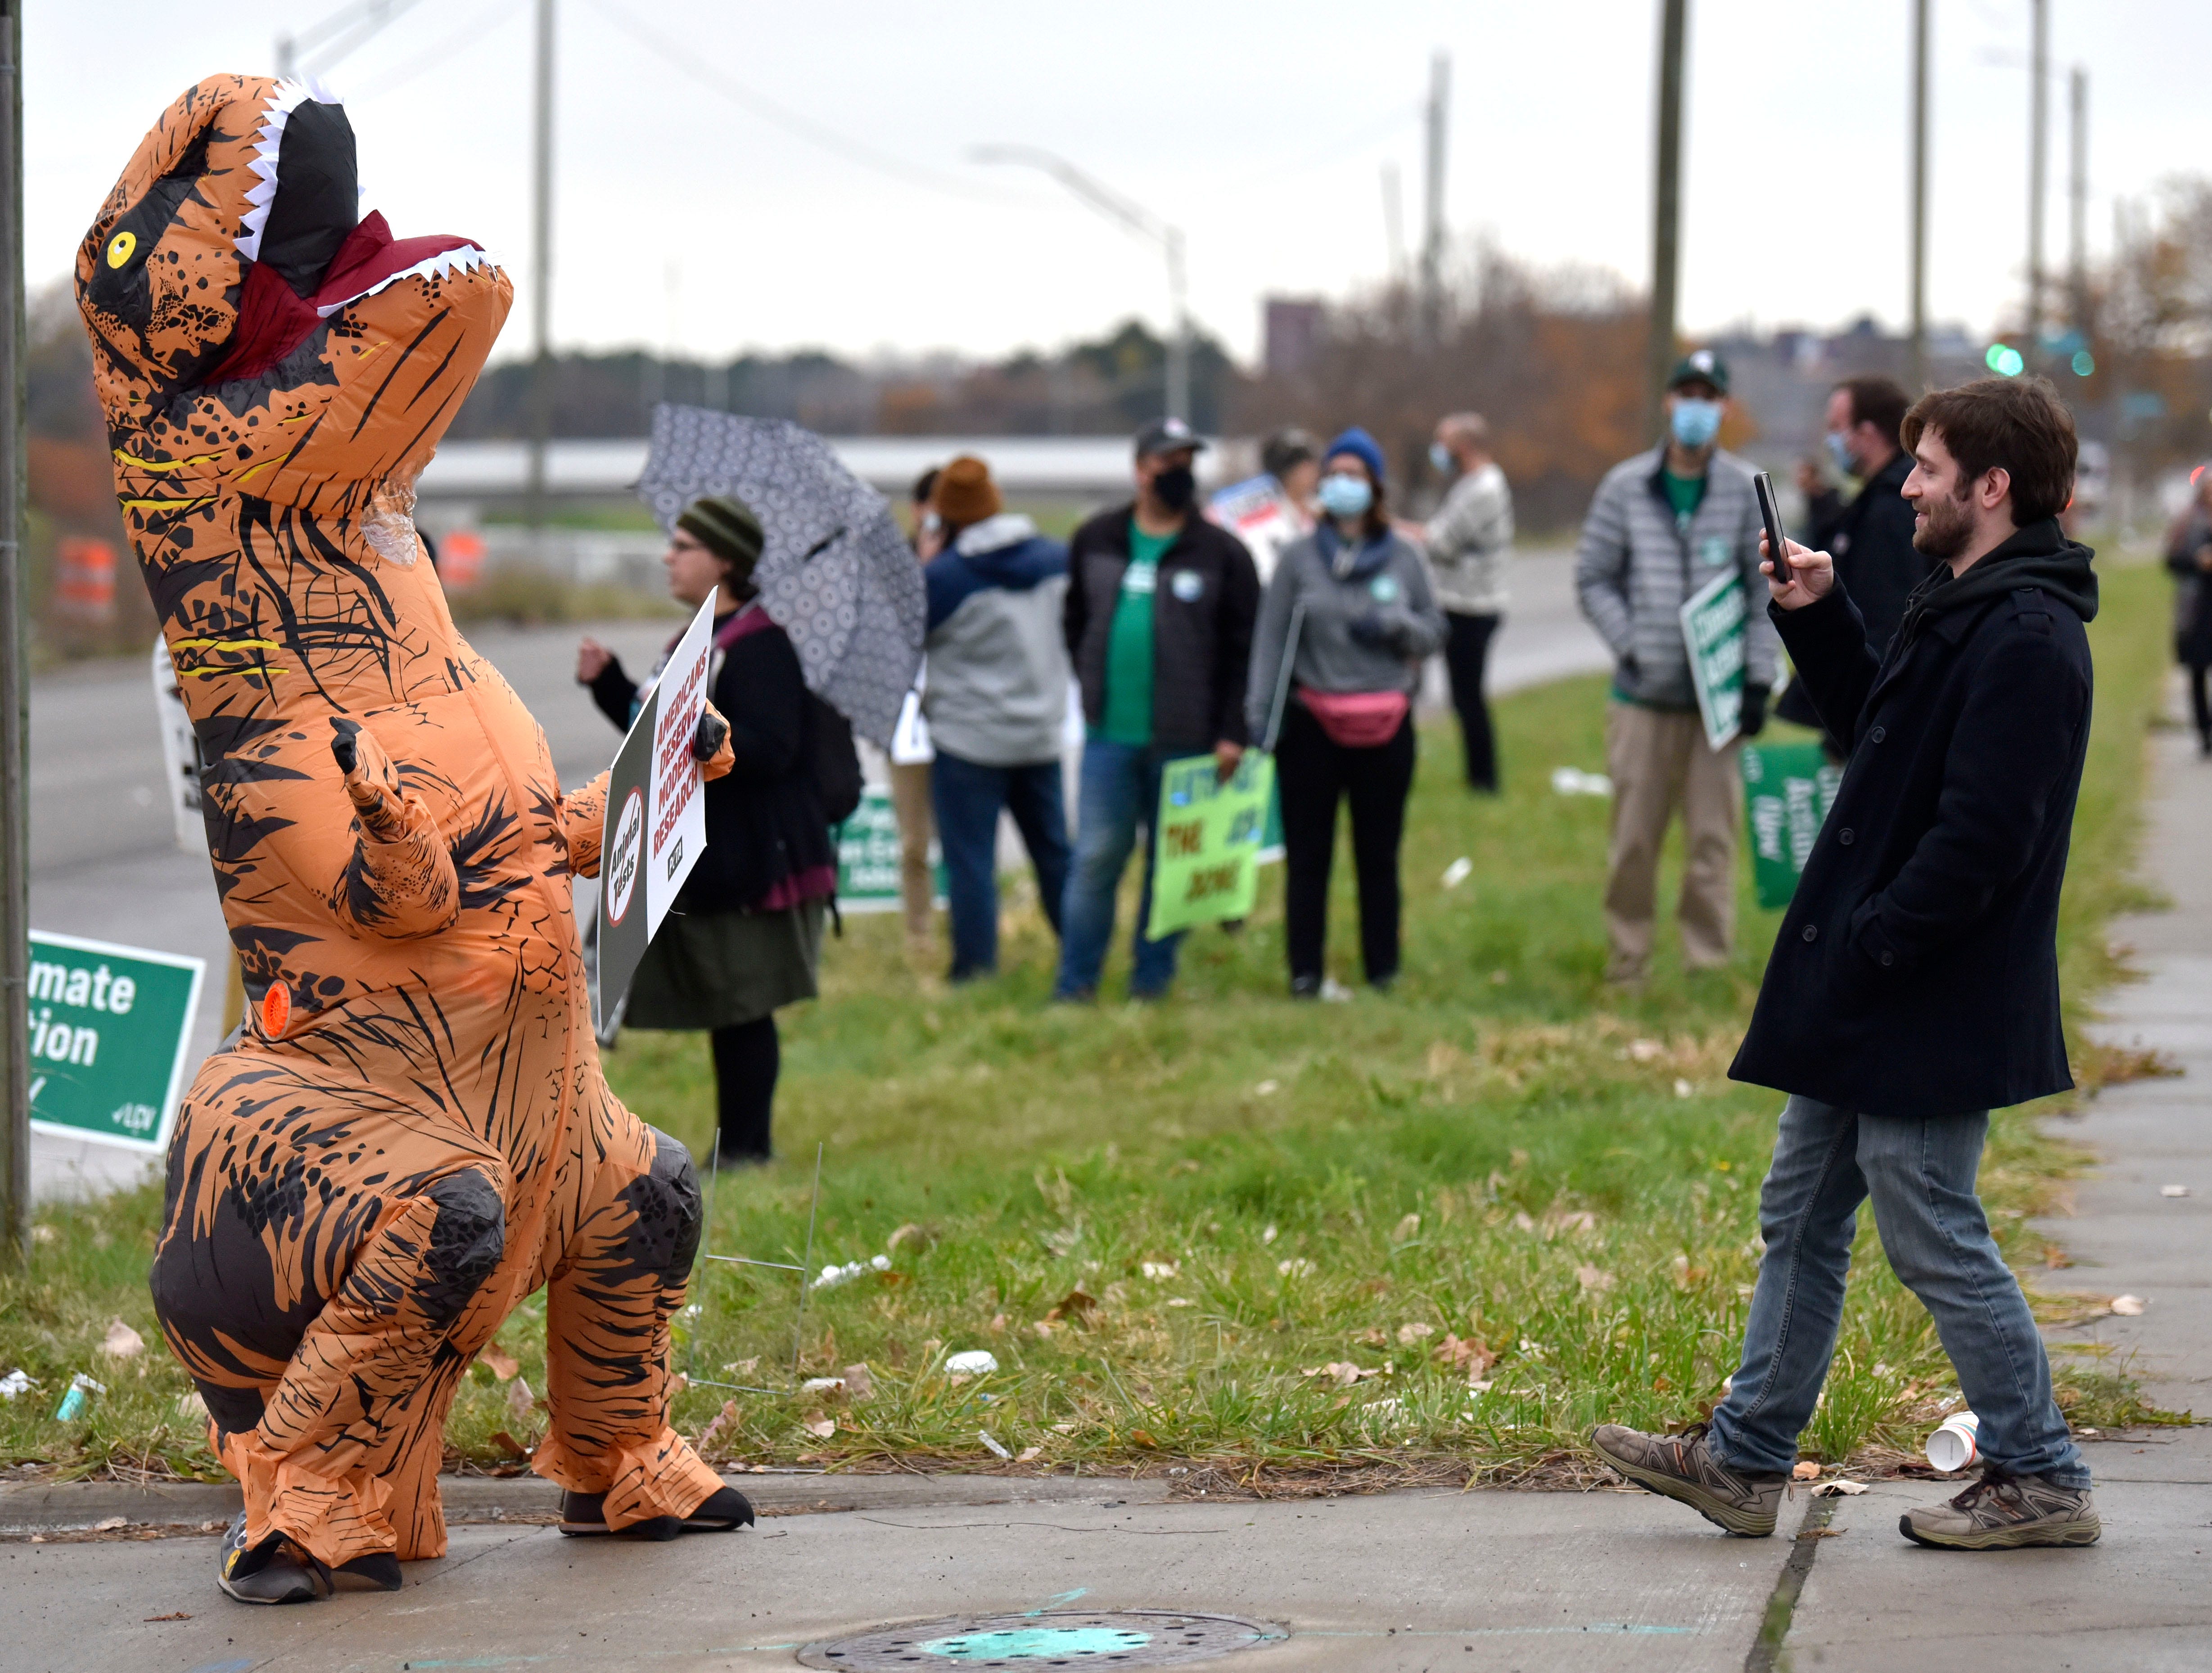 PETA member Sarah Terrien, of Hamtramck, wears an inflatable dinosaur during the protest, Wednesday afternoon, November 17, 2021. 
\Members of Oil & Water Don't Mix Keep Oil Out of the Great Lakes and others protest Enbridge's twin Line 5 oil pipelines in the Straits of Mackinac before President Joe Biden tours the GM Factory ZERO in Detroit.